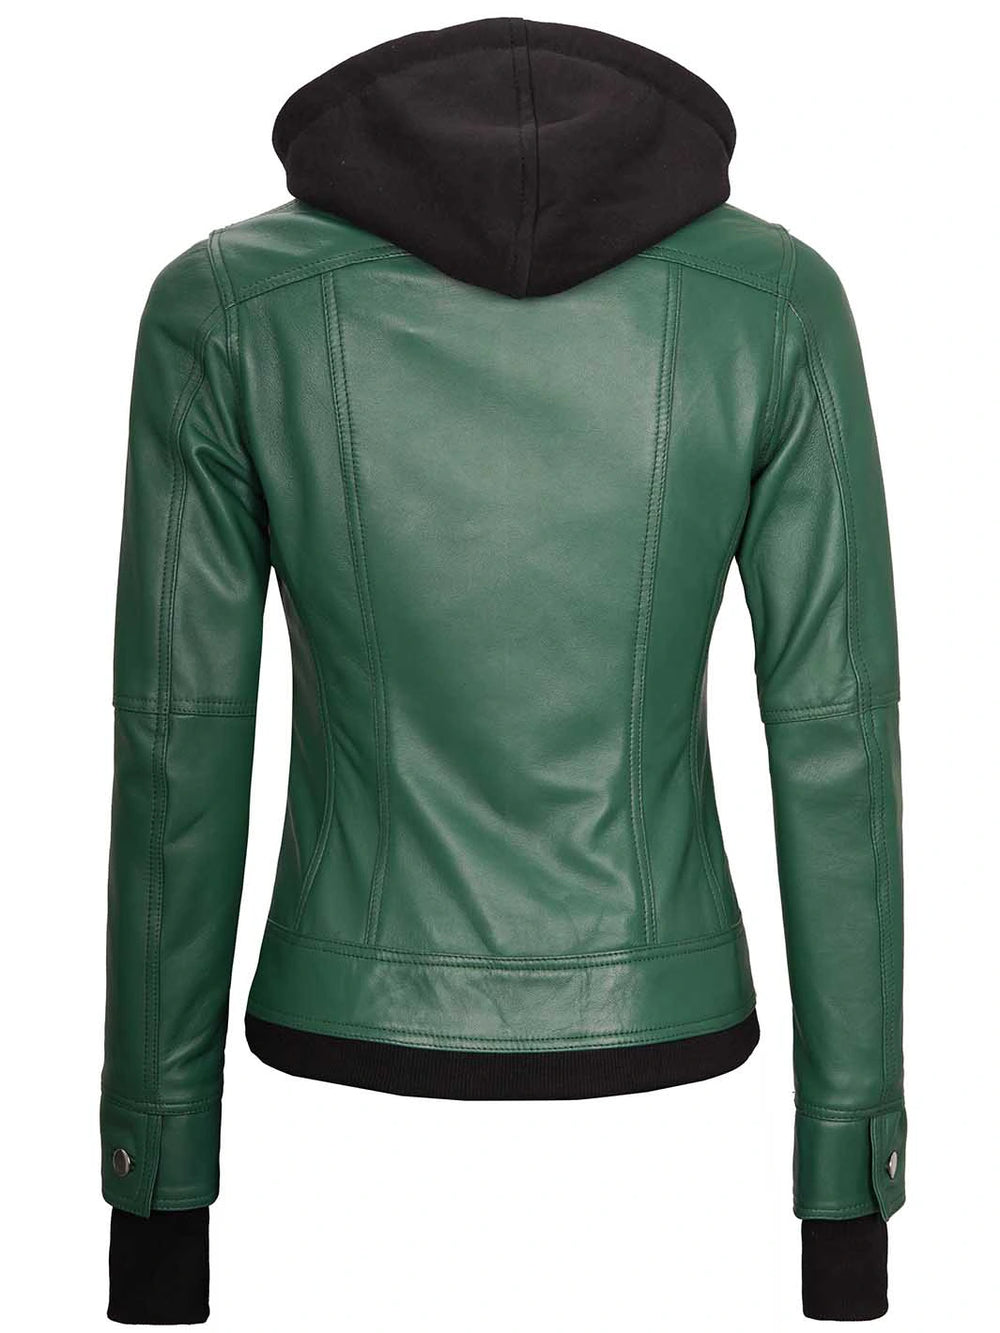 hooded leather jacket for women